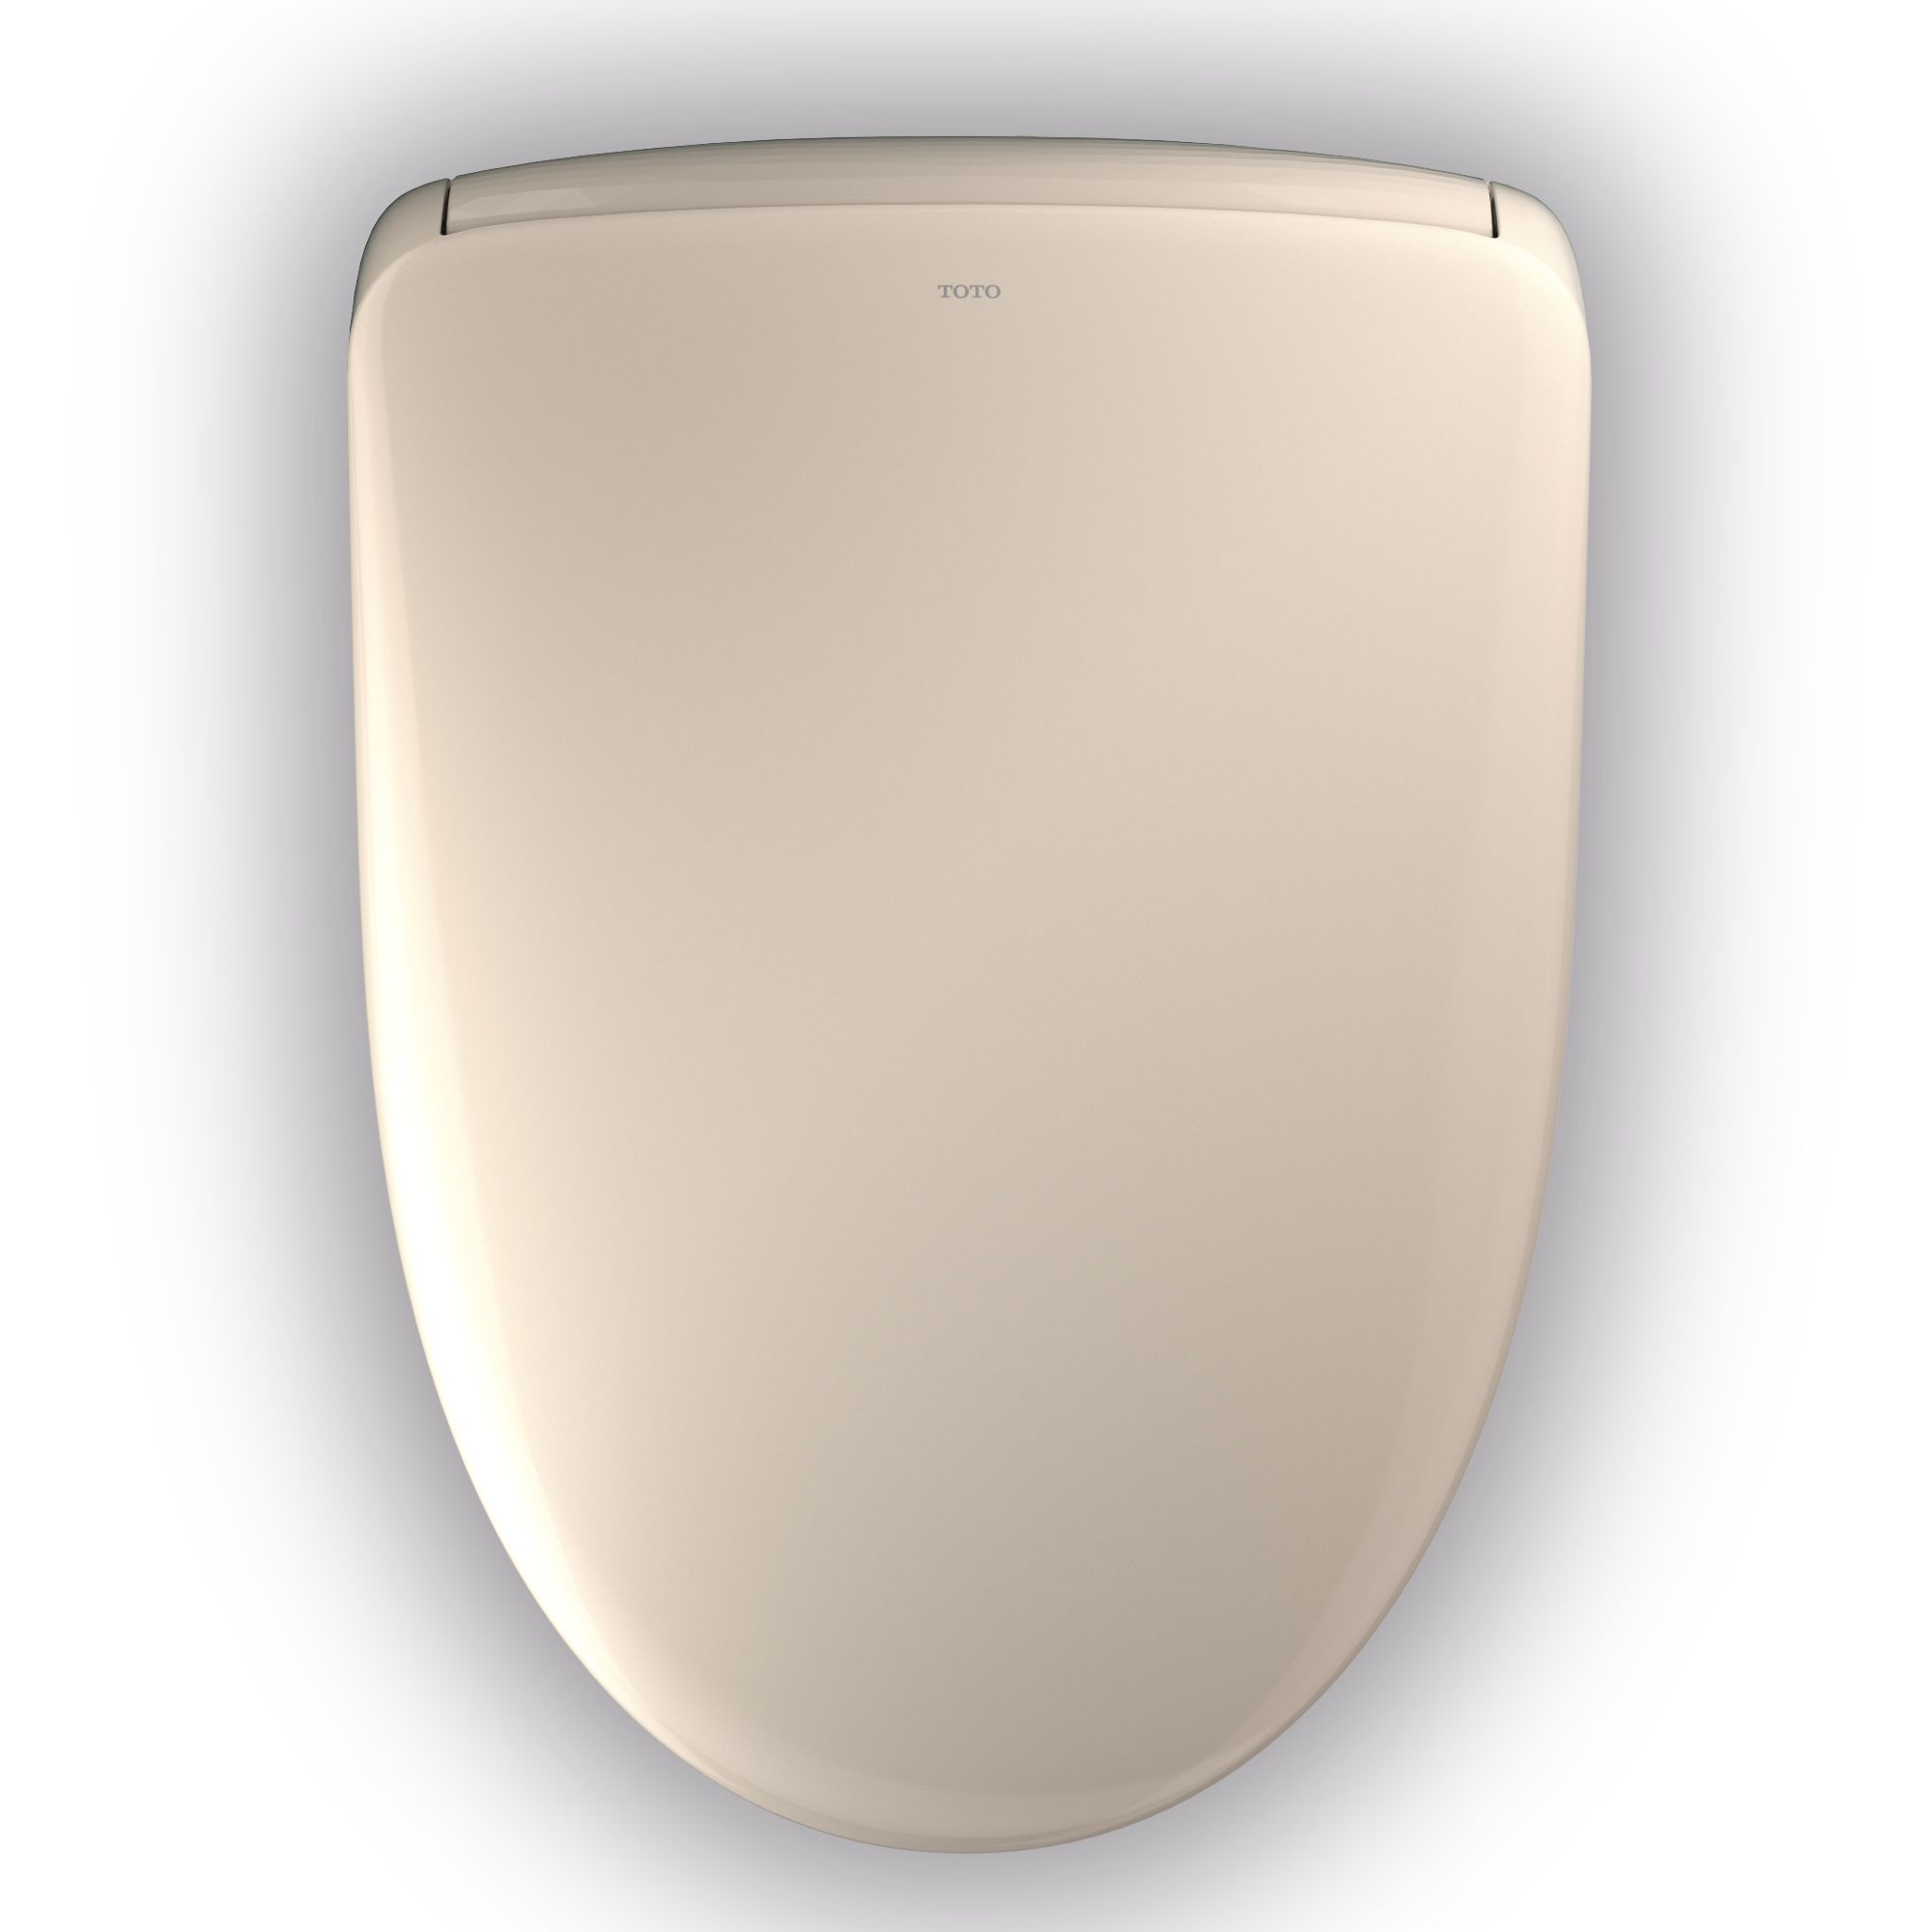 Toto S7A Electronic Bidet Toilet Seat, Classic Lid